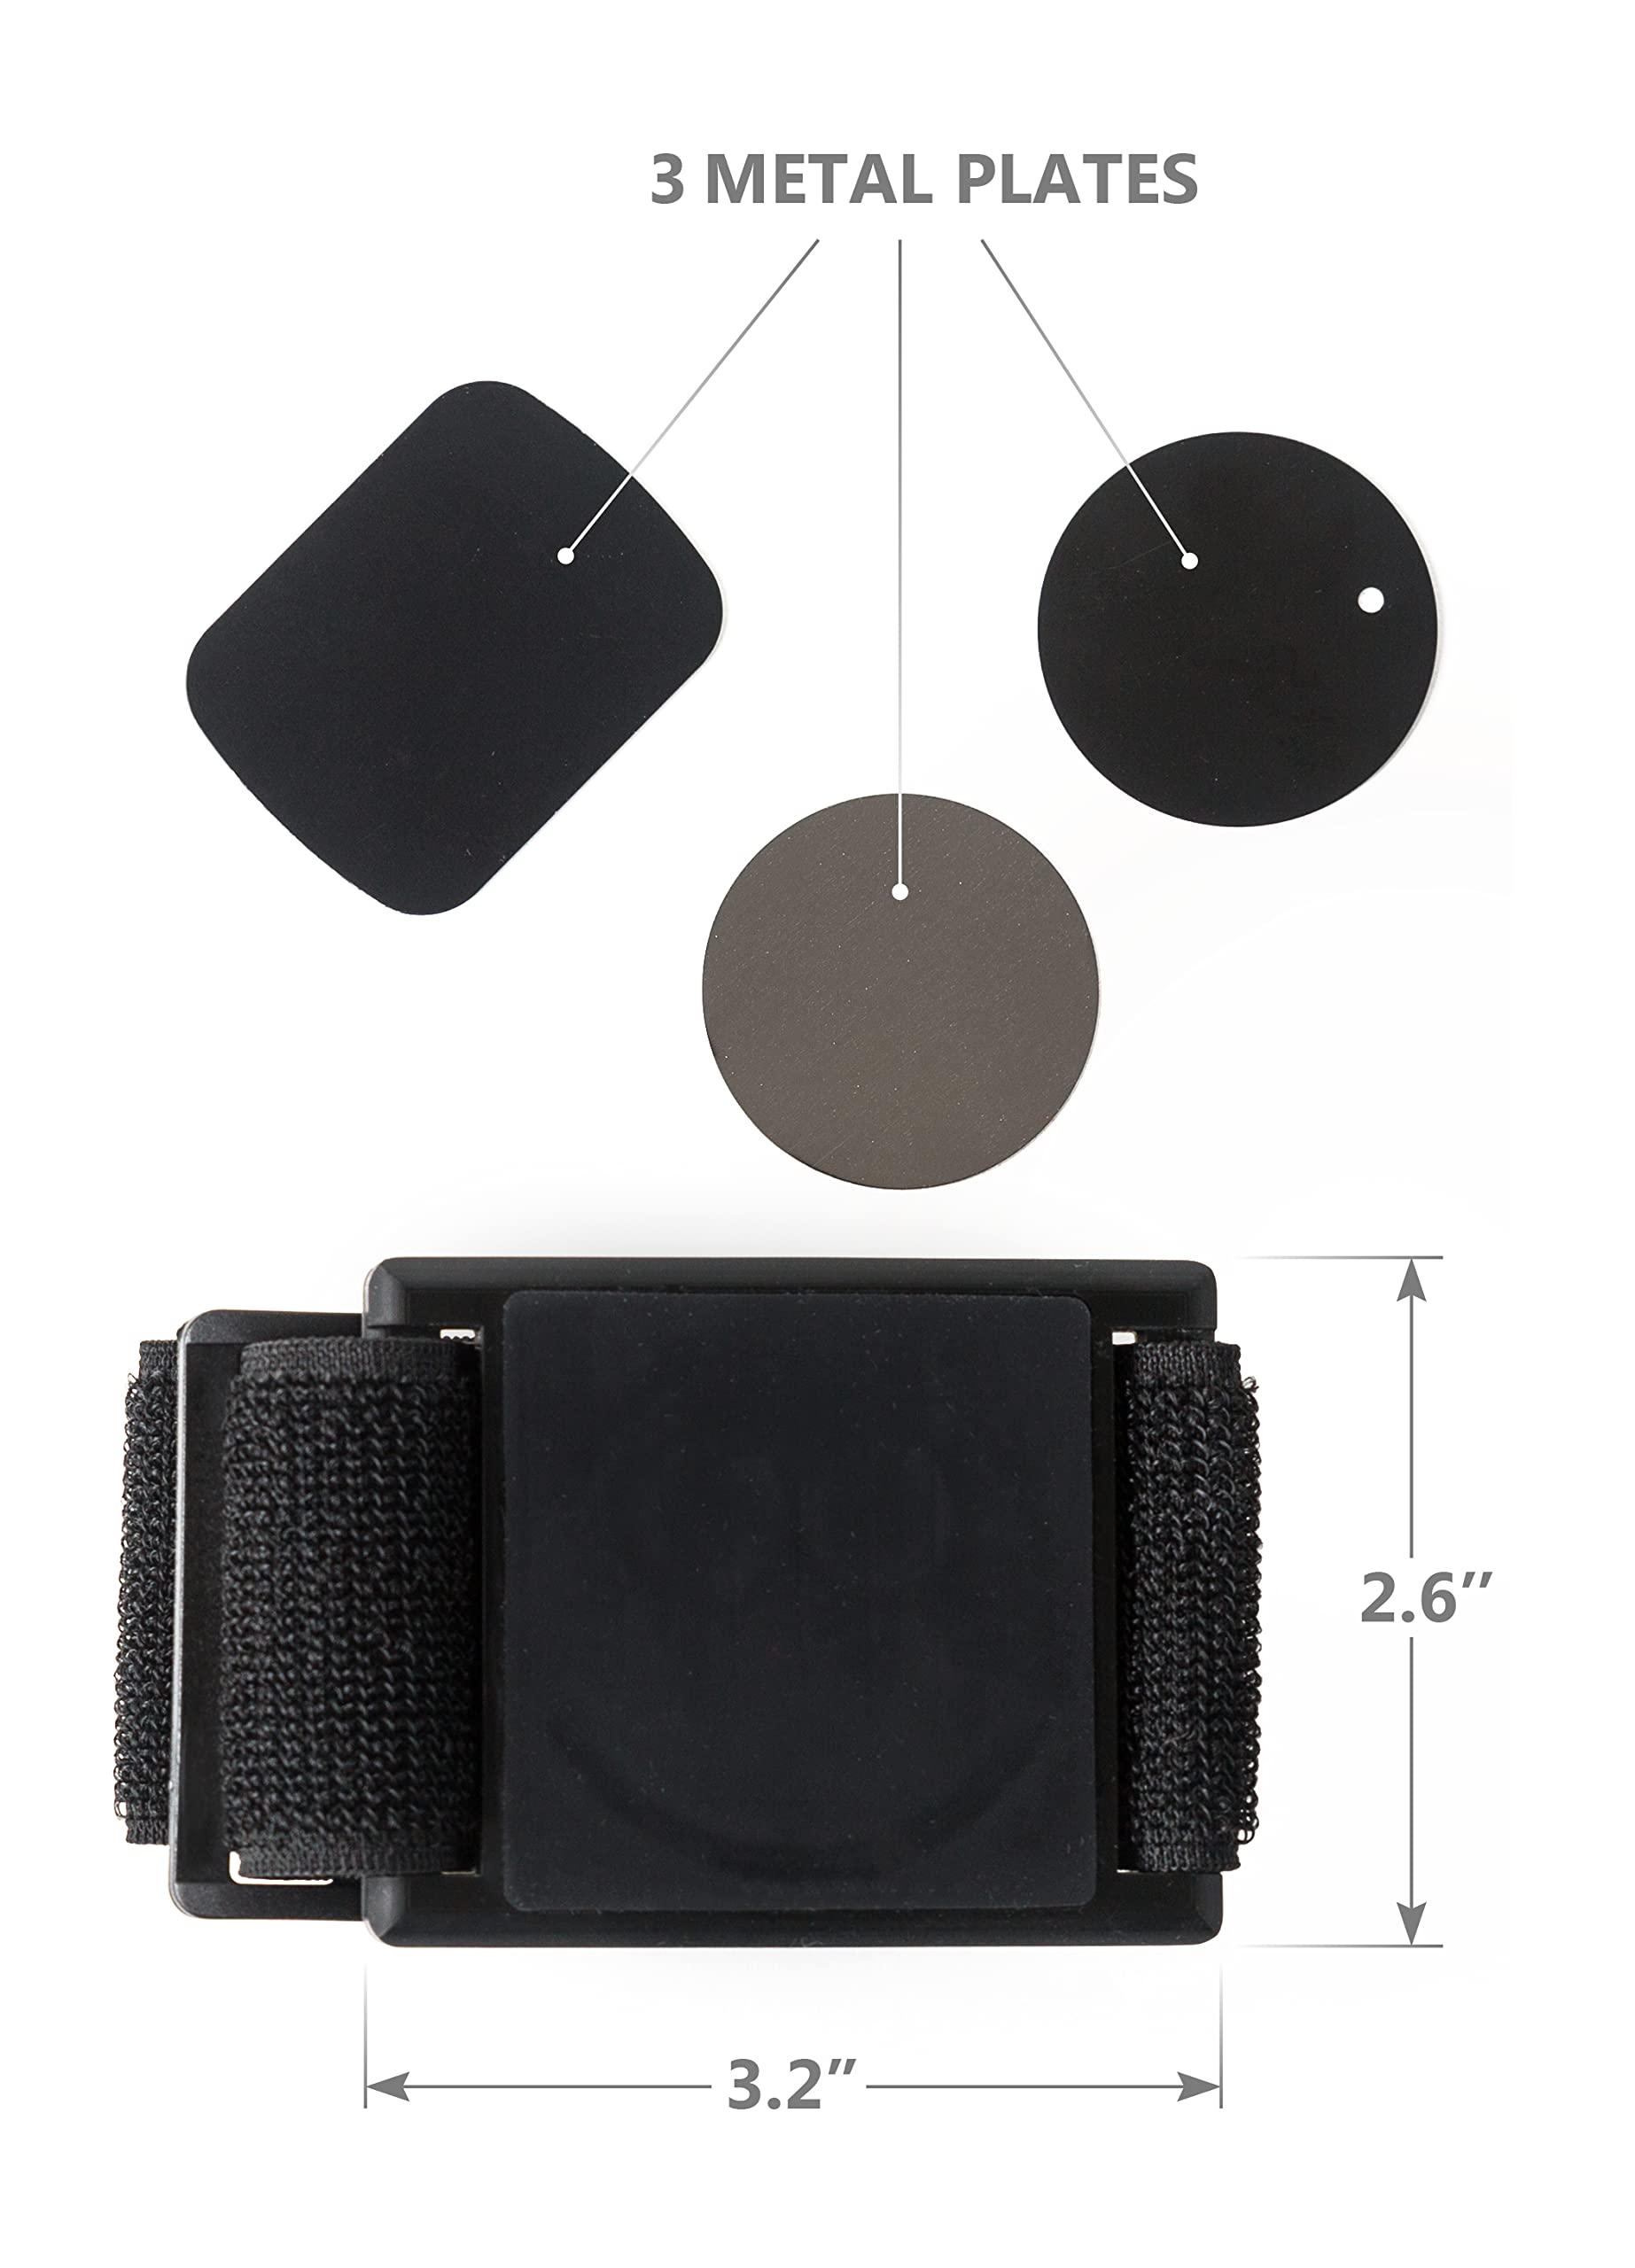 Pilot Kneeboard for iPad, iPad Mini, iPhone, Any Android Smartphone, Any Tablet, Universal Solution